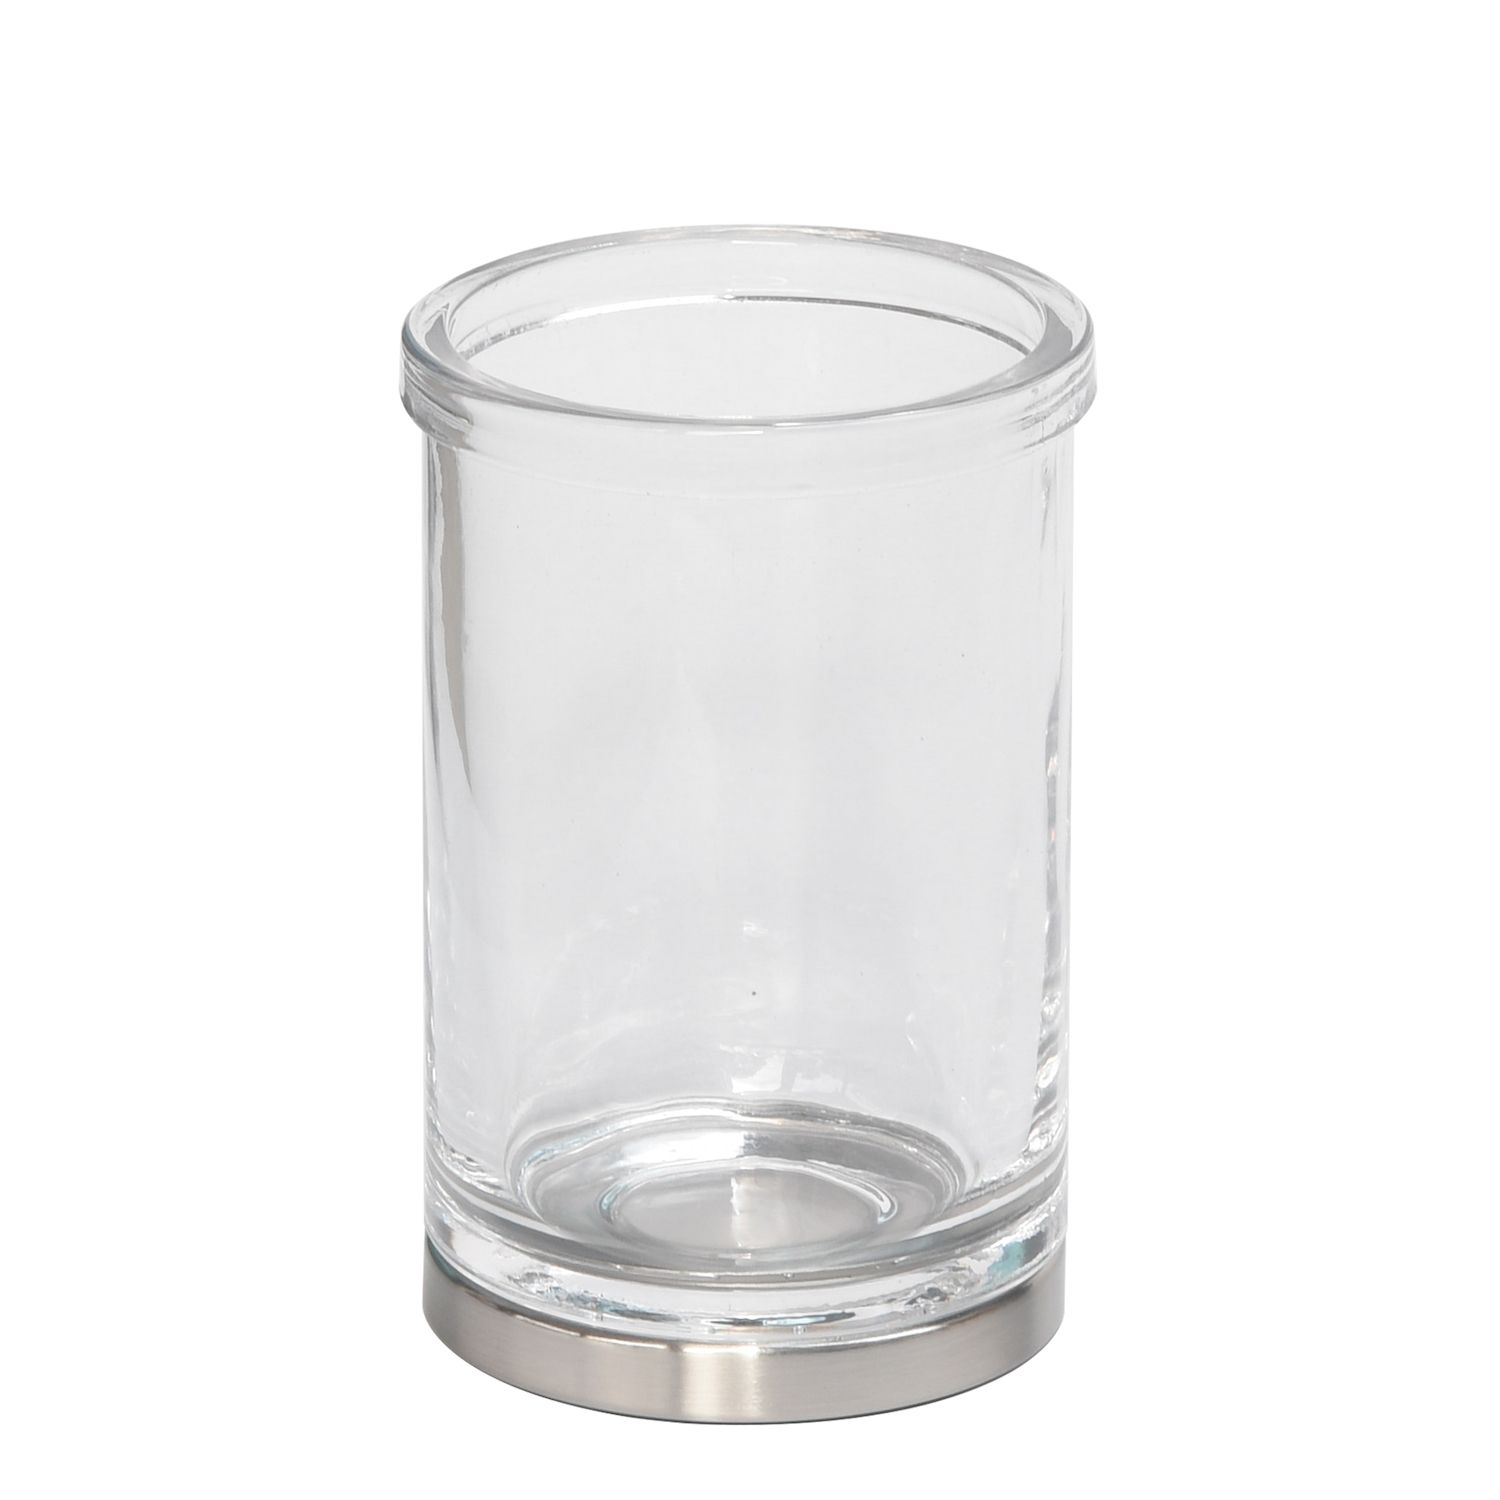 GIBSON HOME Great Foundations 16 oz. Glass Tumblers (4-Pack